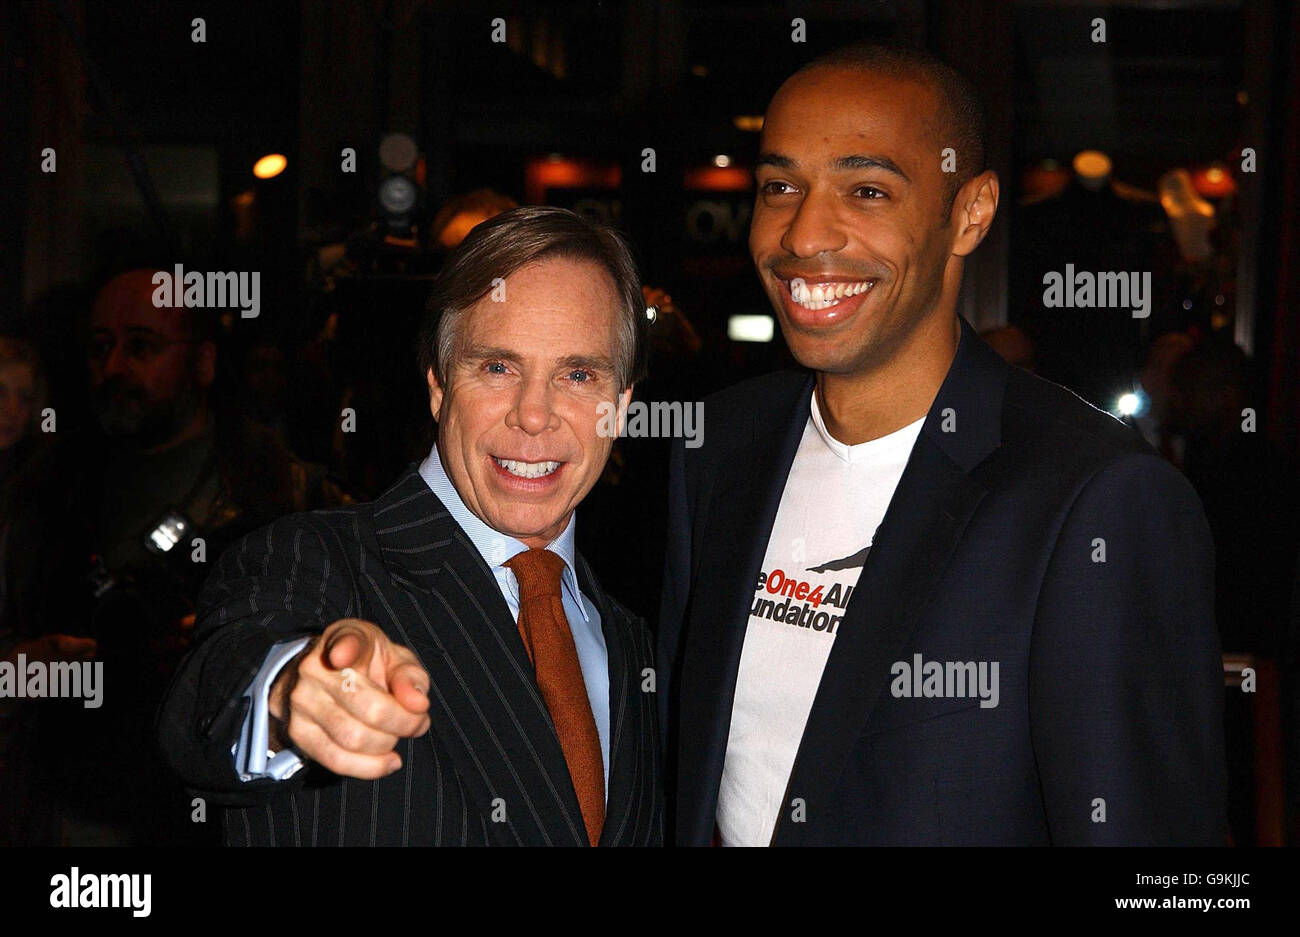 France & Arsenal footballer Thierry Henry (right) & designer Tommy Hilfiger  at a photocall to announce an exciting new partnership, in the Hilfiger  Store in Regent Street, central London Stock Photo -